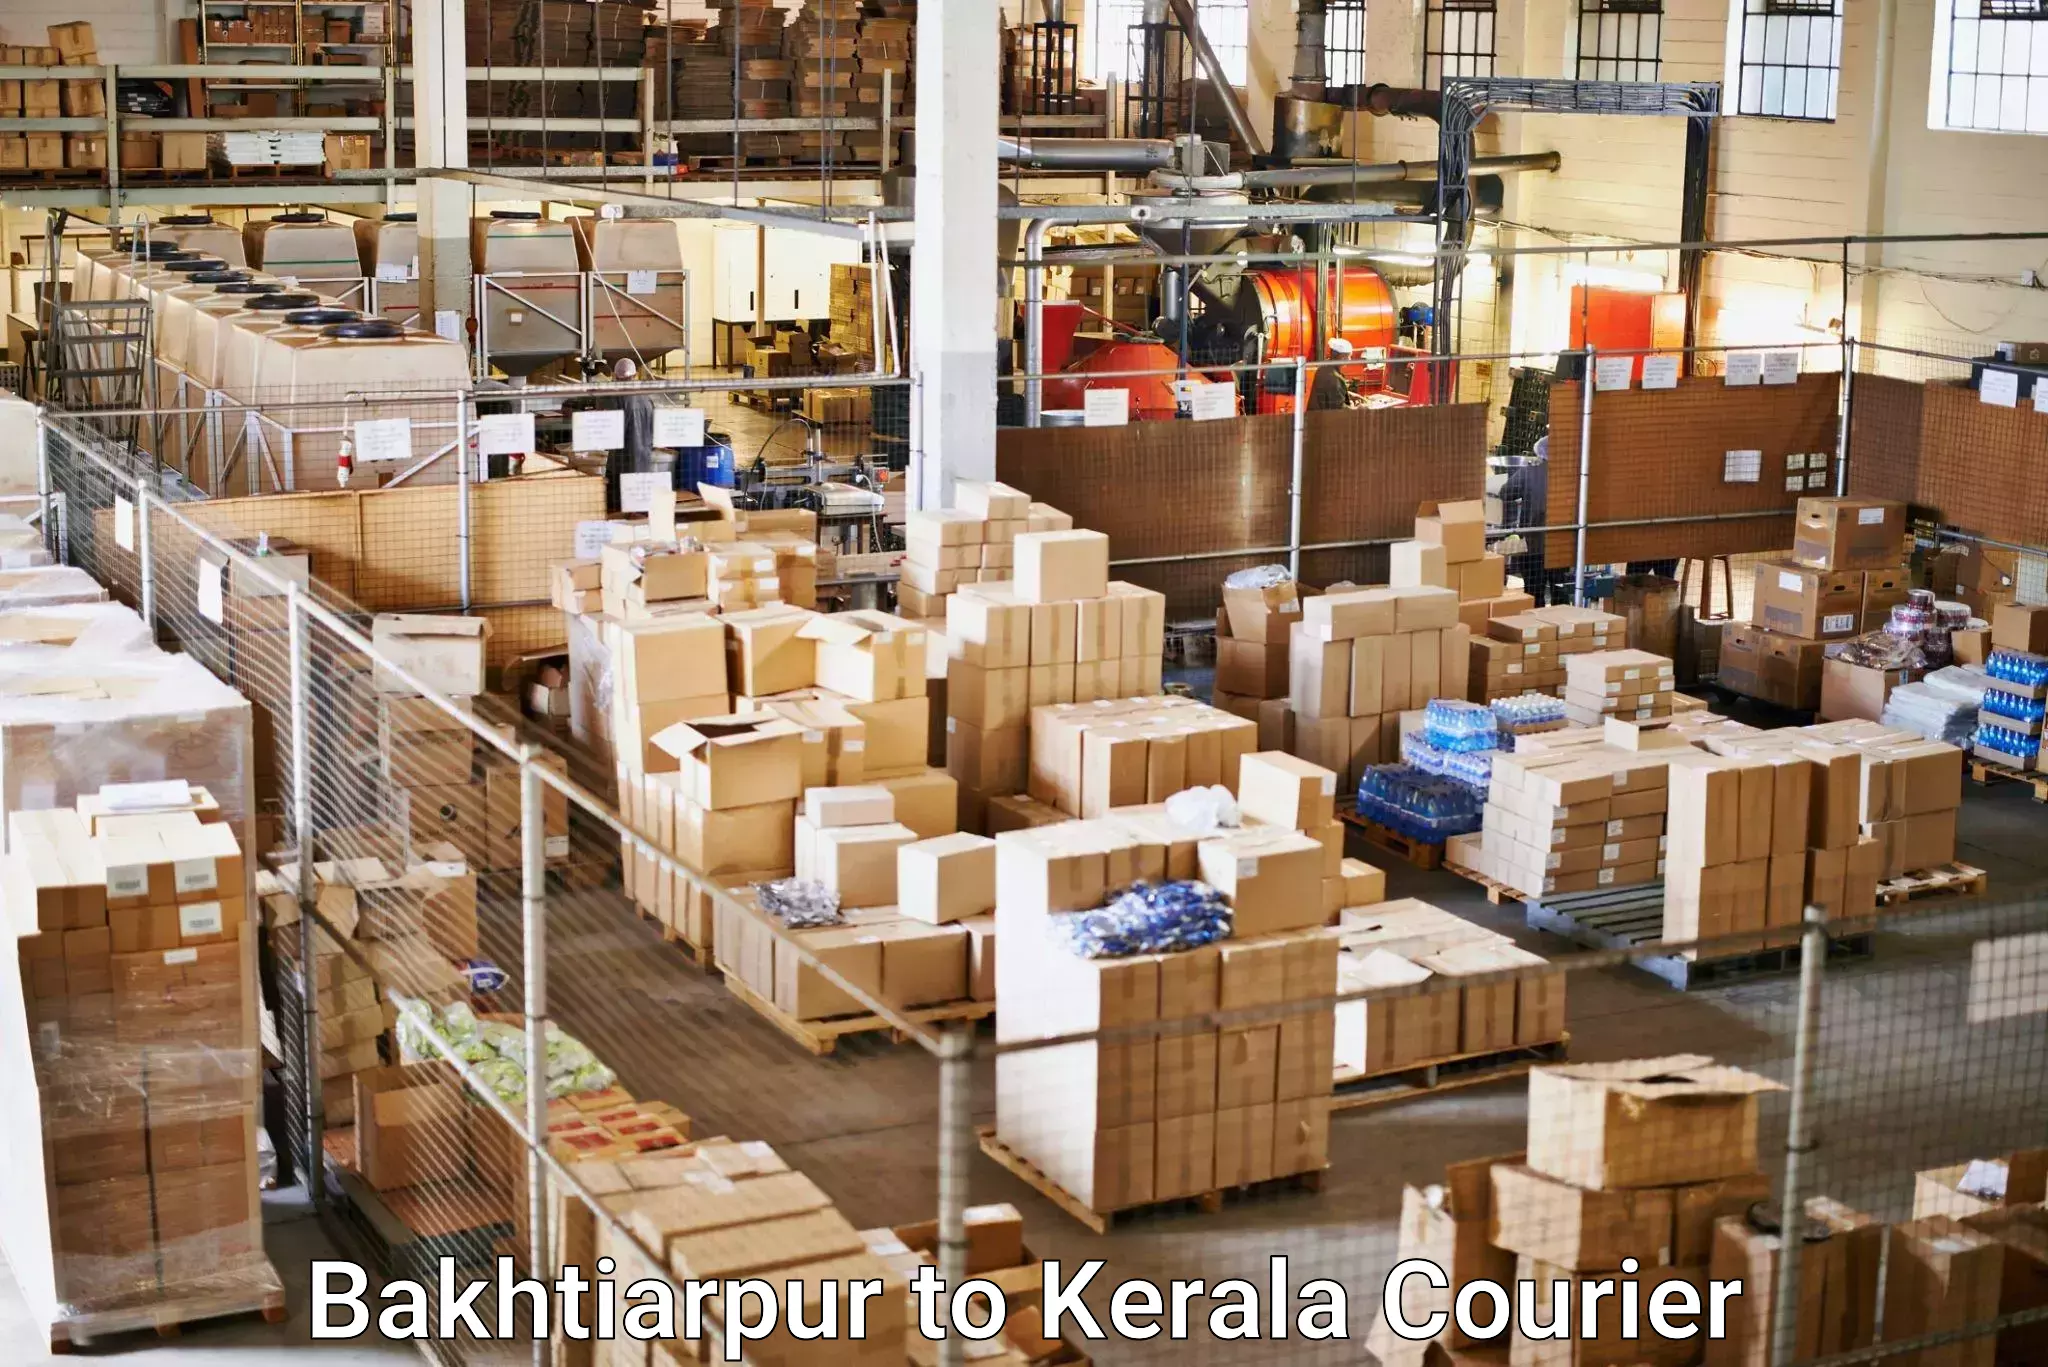 Local delivery service Bakhtiarpur to Rajamudy